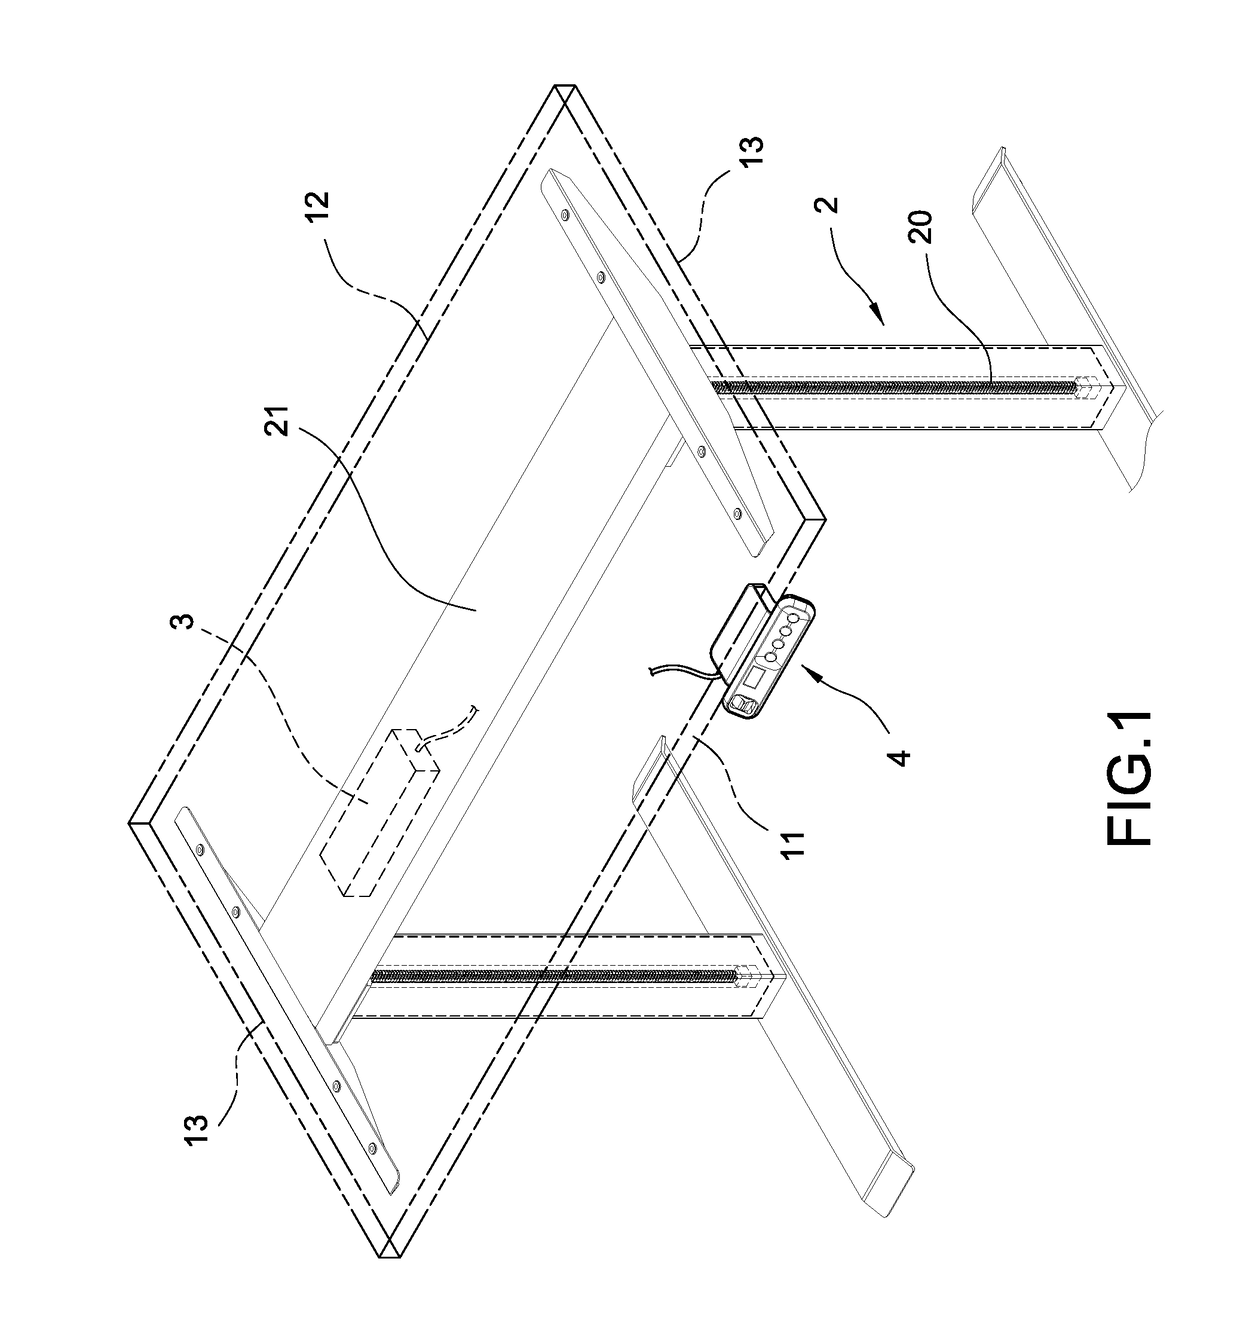 Table elevating device